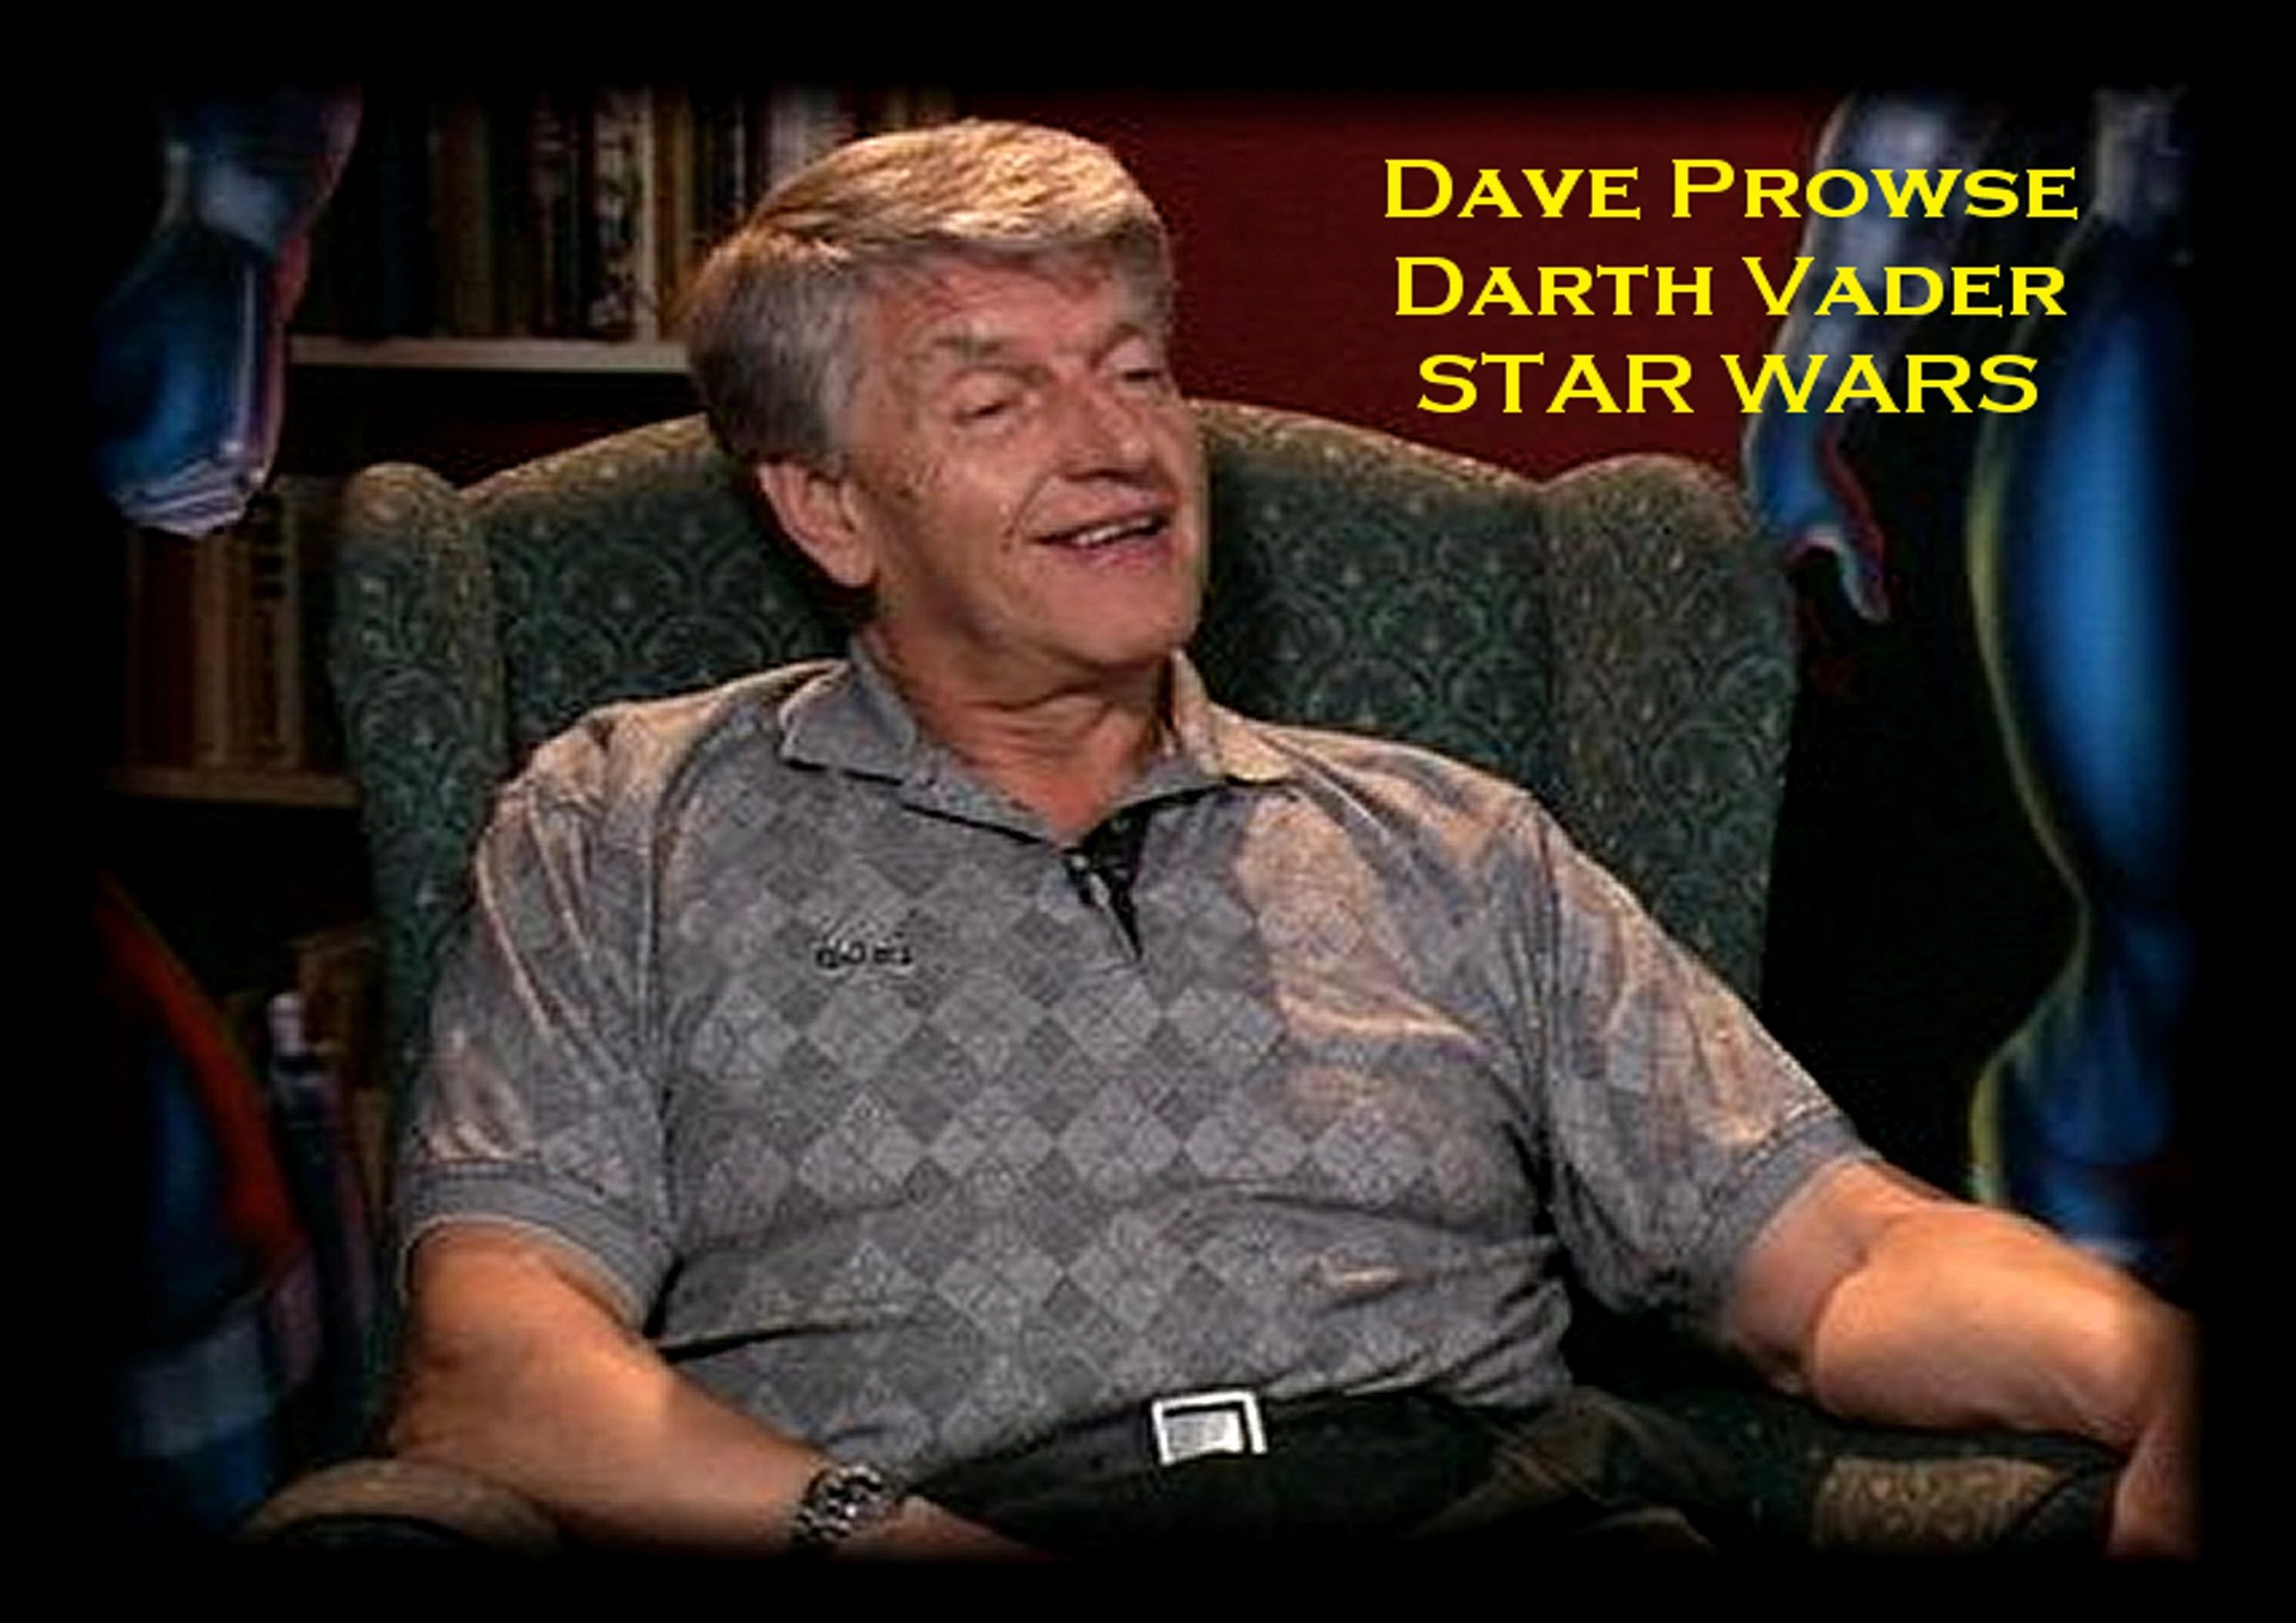 THE DARK SIDE OF THE FORCE.COM interviews presents DAVE PROWSE the actor who played DARTH VADER